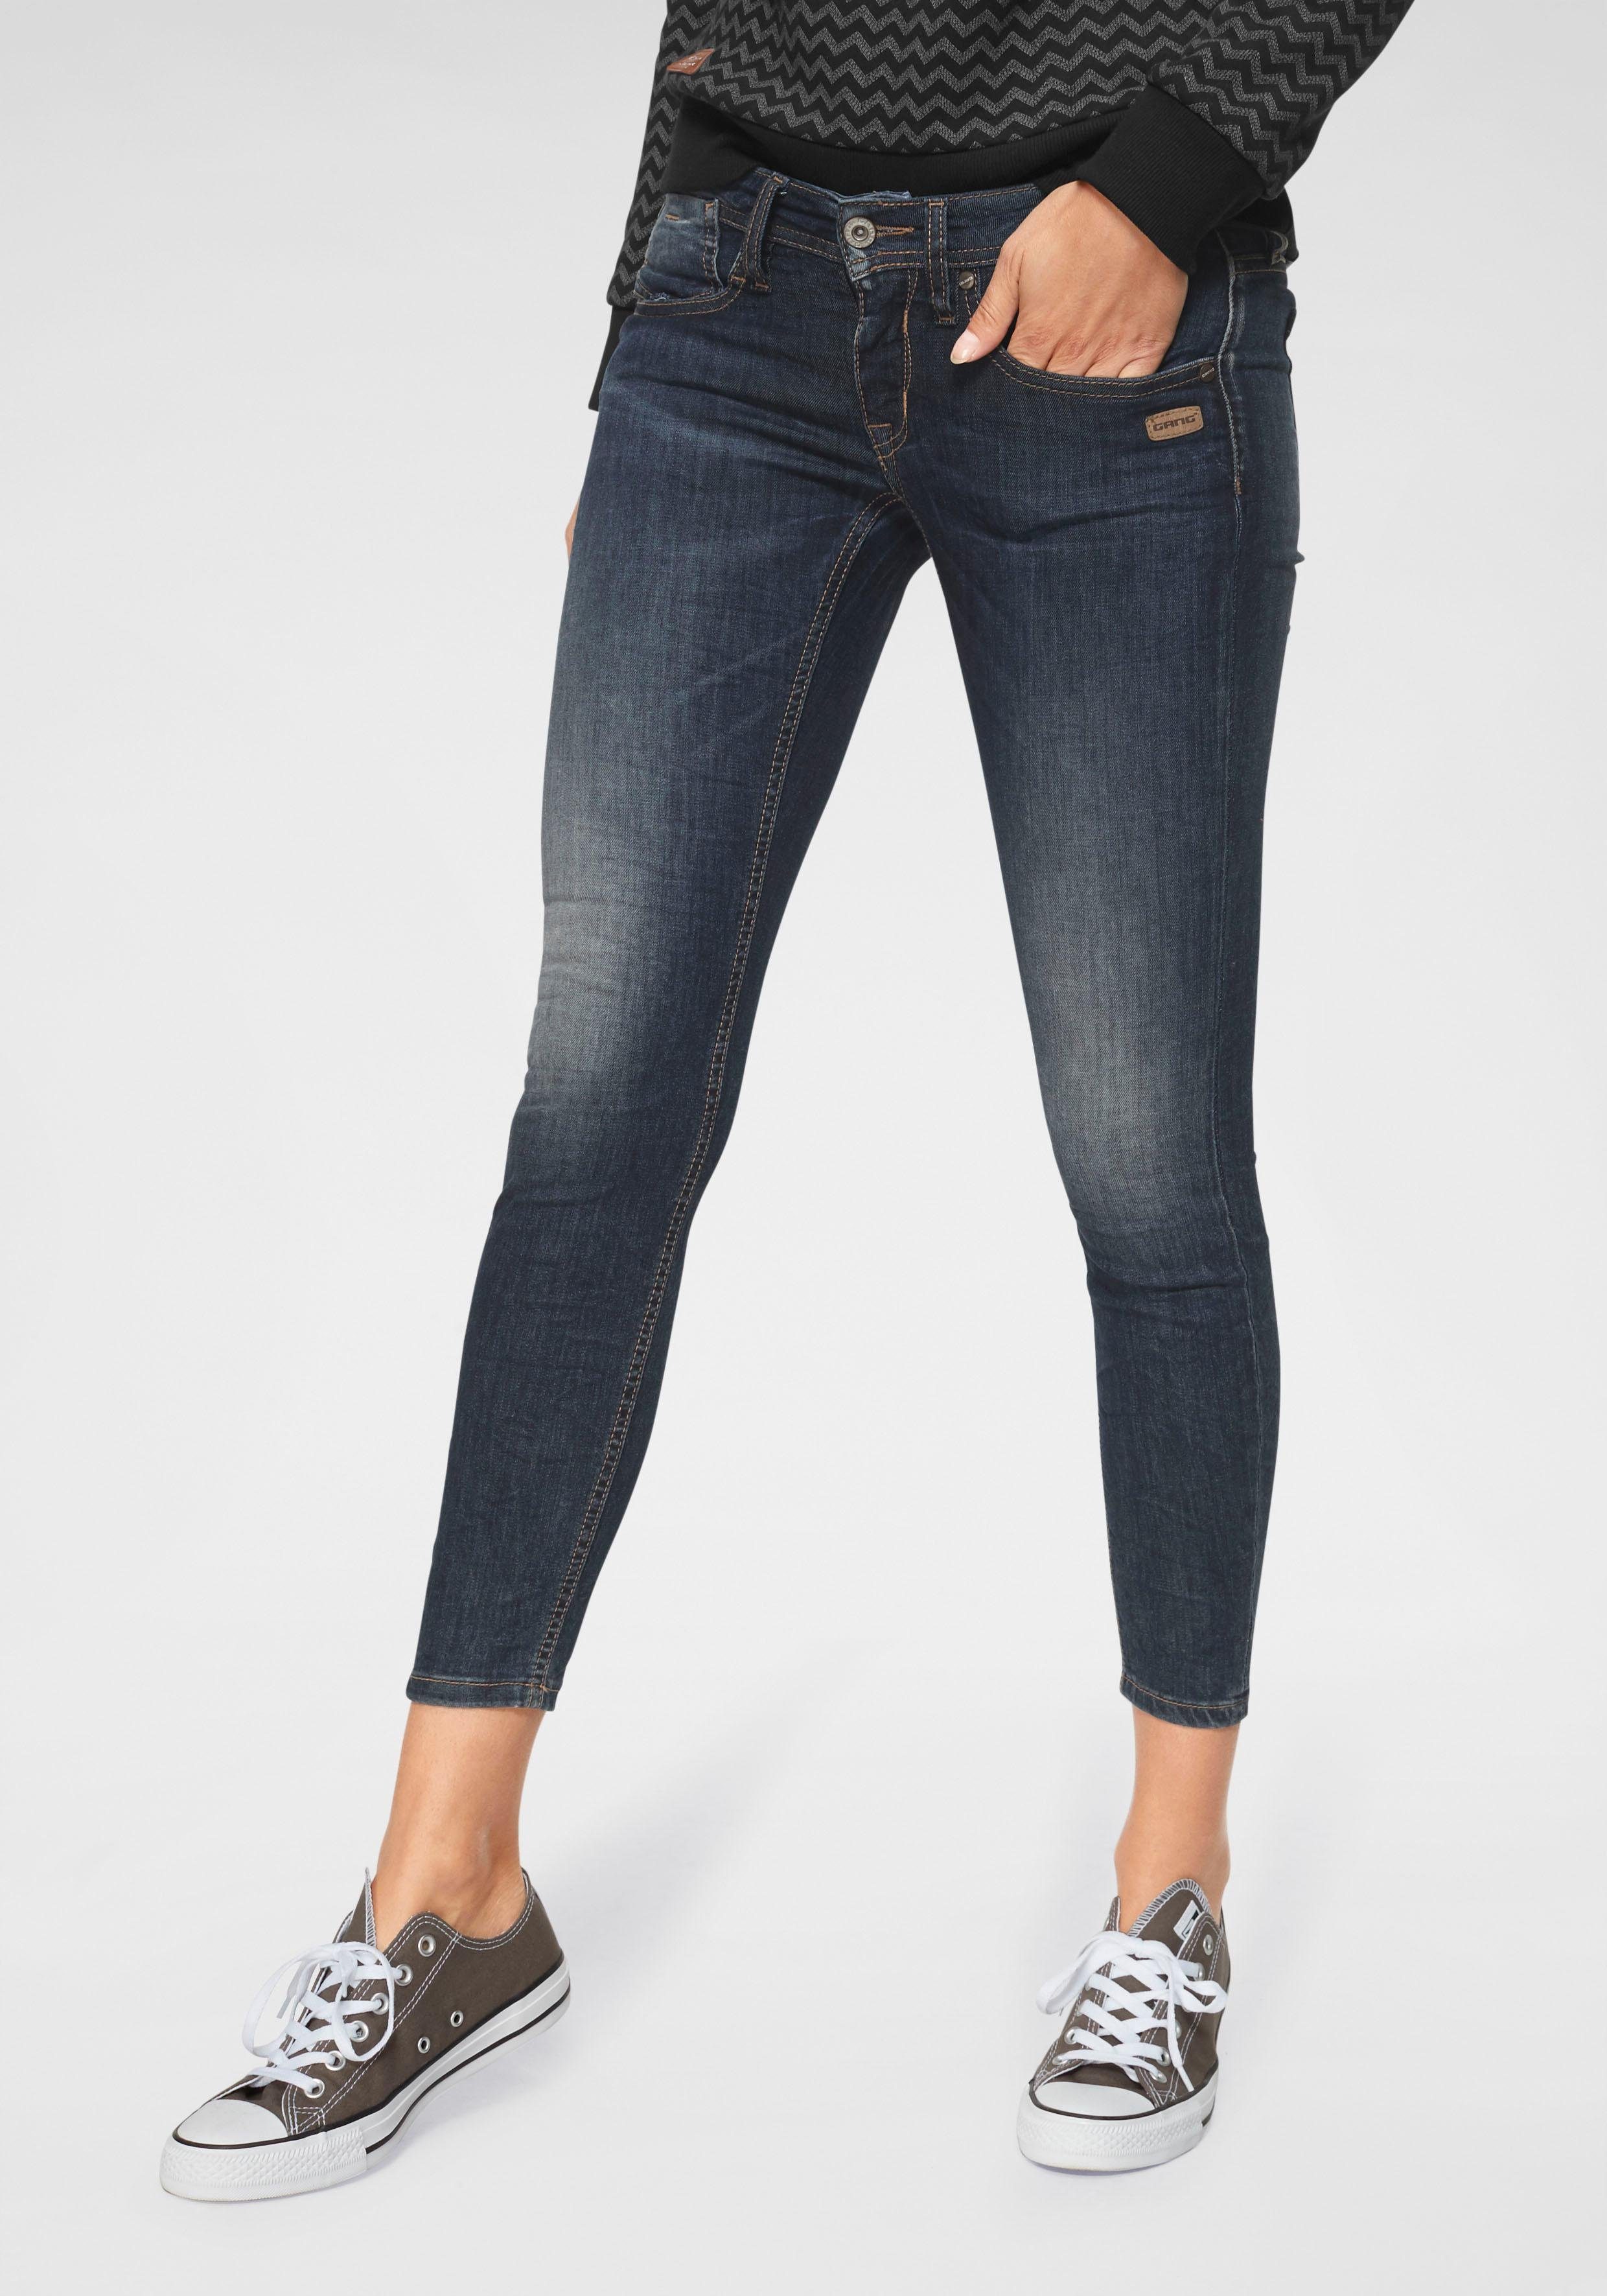 GANG Skinny-fit-Jeans Flanking-Style, niedriger Knöchellanger mit 94Faye Leibhöhe im Skinny-fit